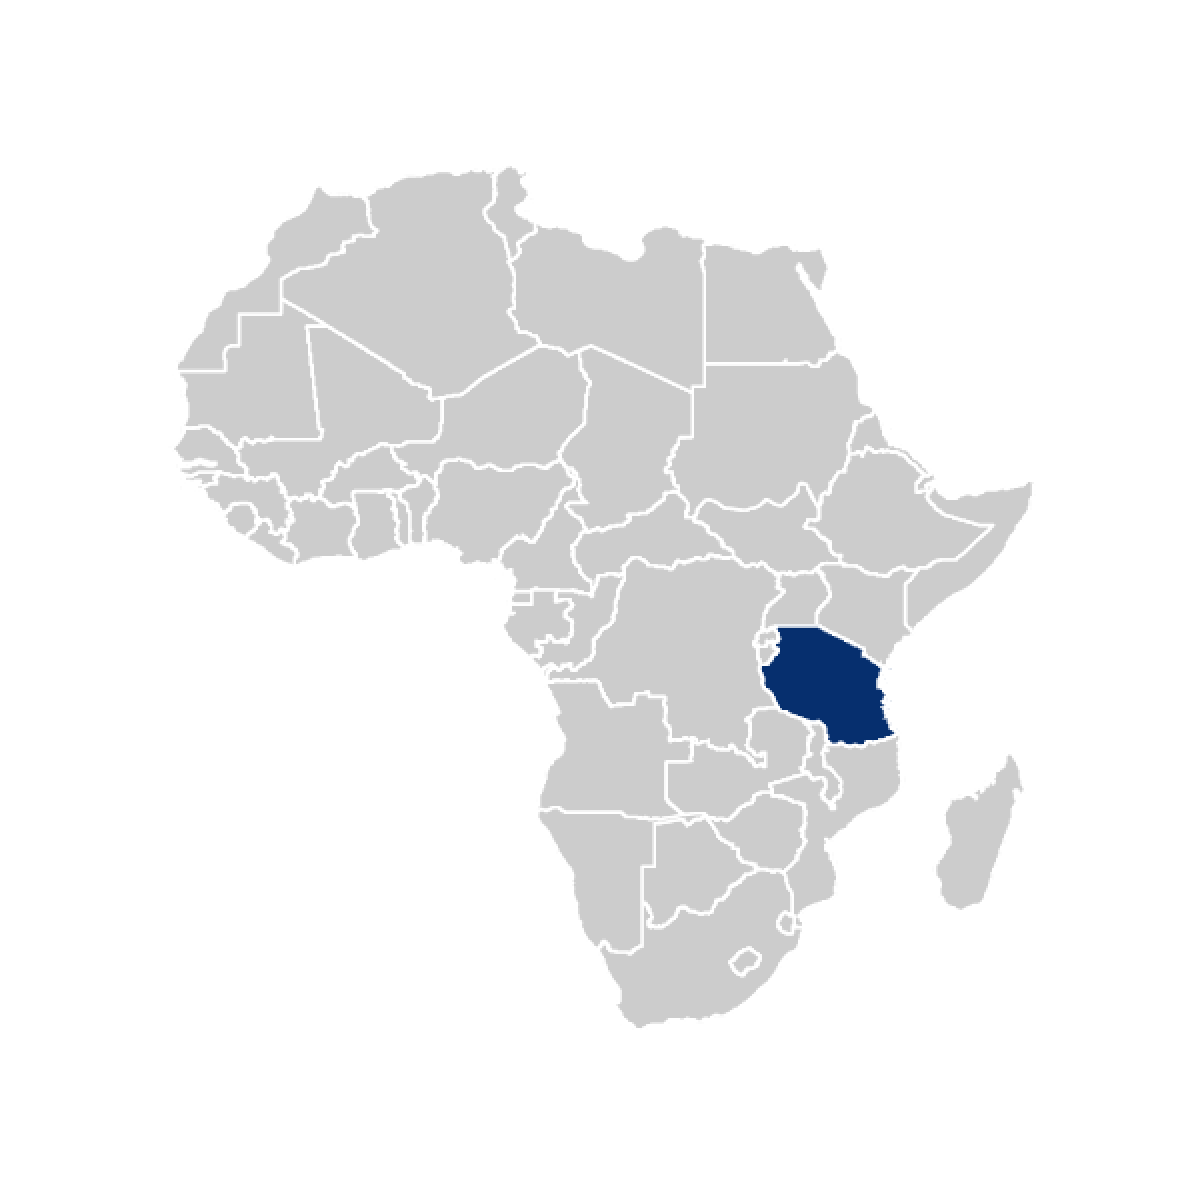 Tanzania highlighted in Africa map